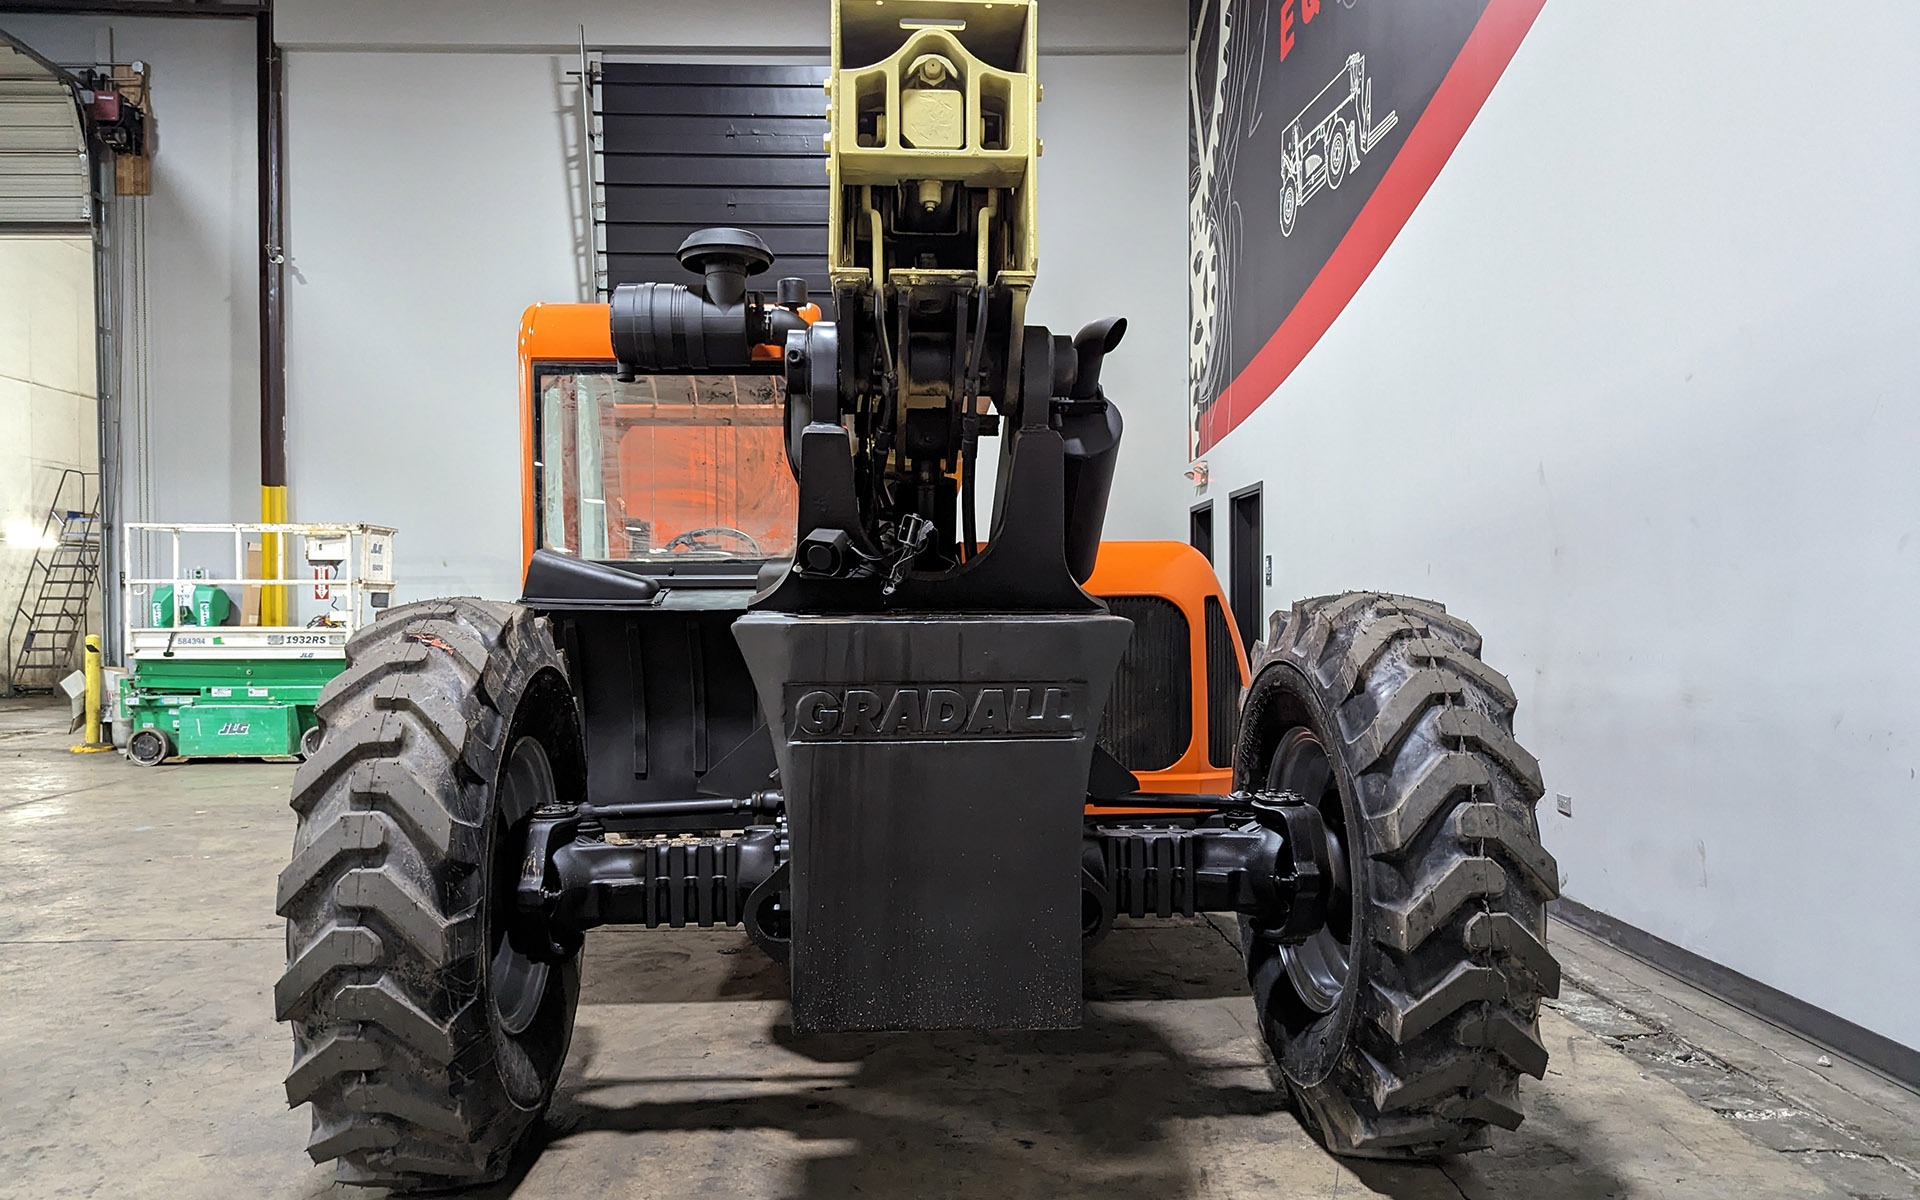 Used 2003 JLG G9-43A  | Cary, IL